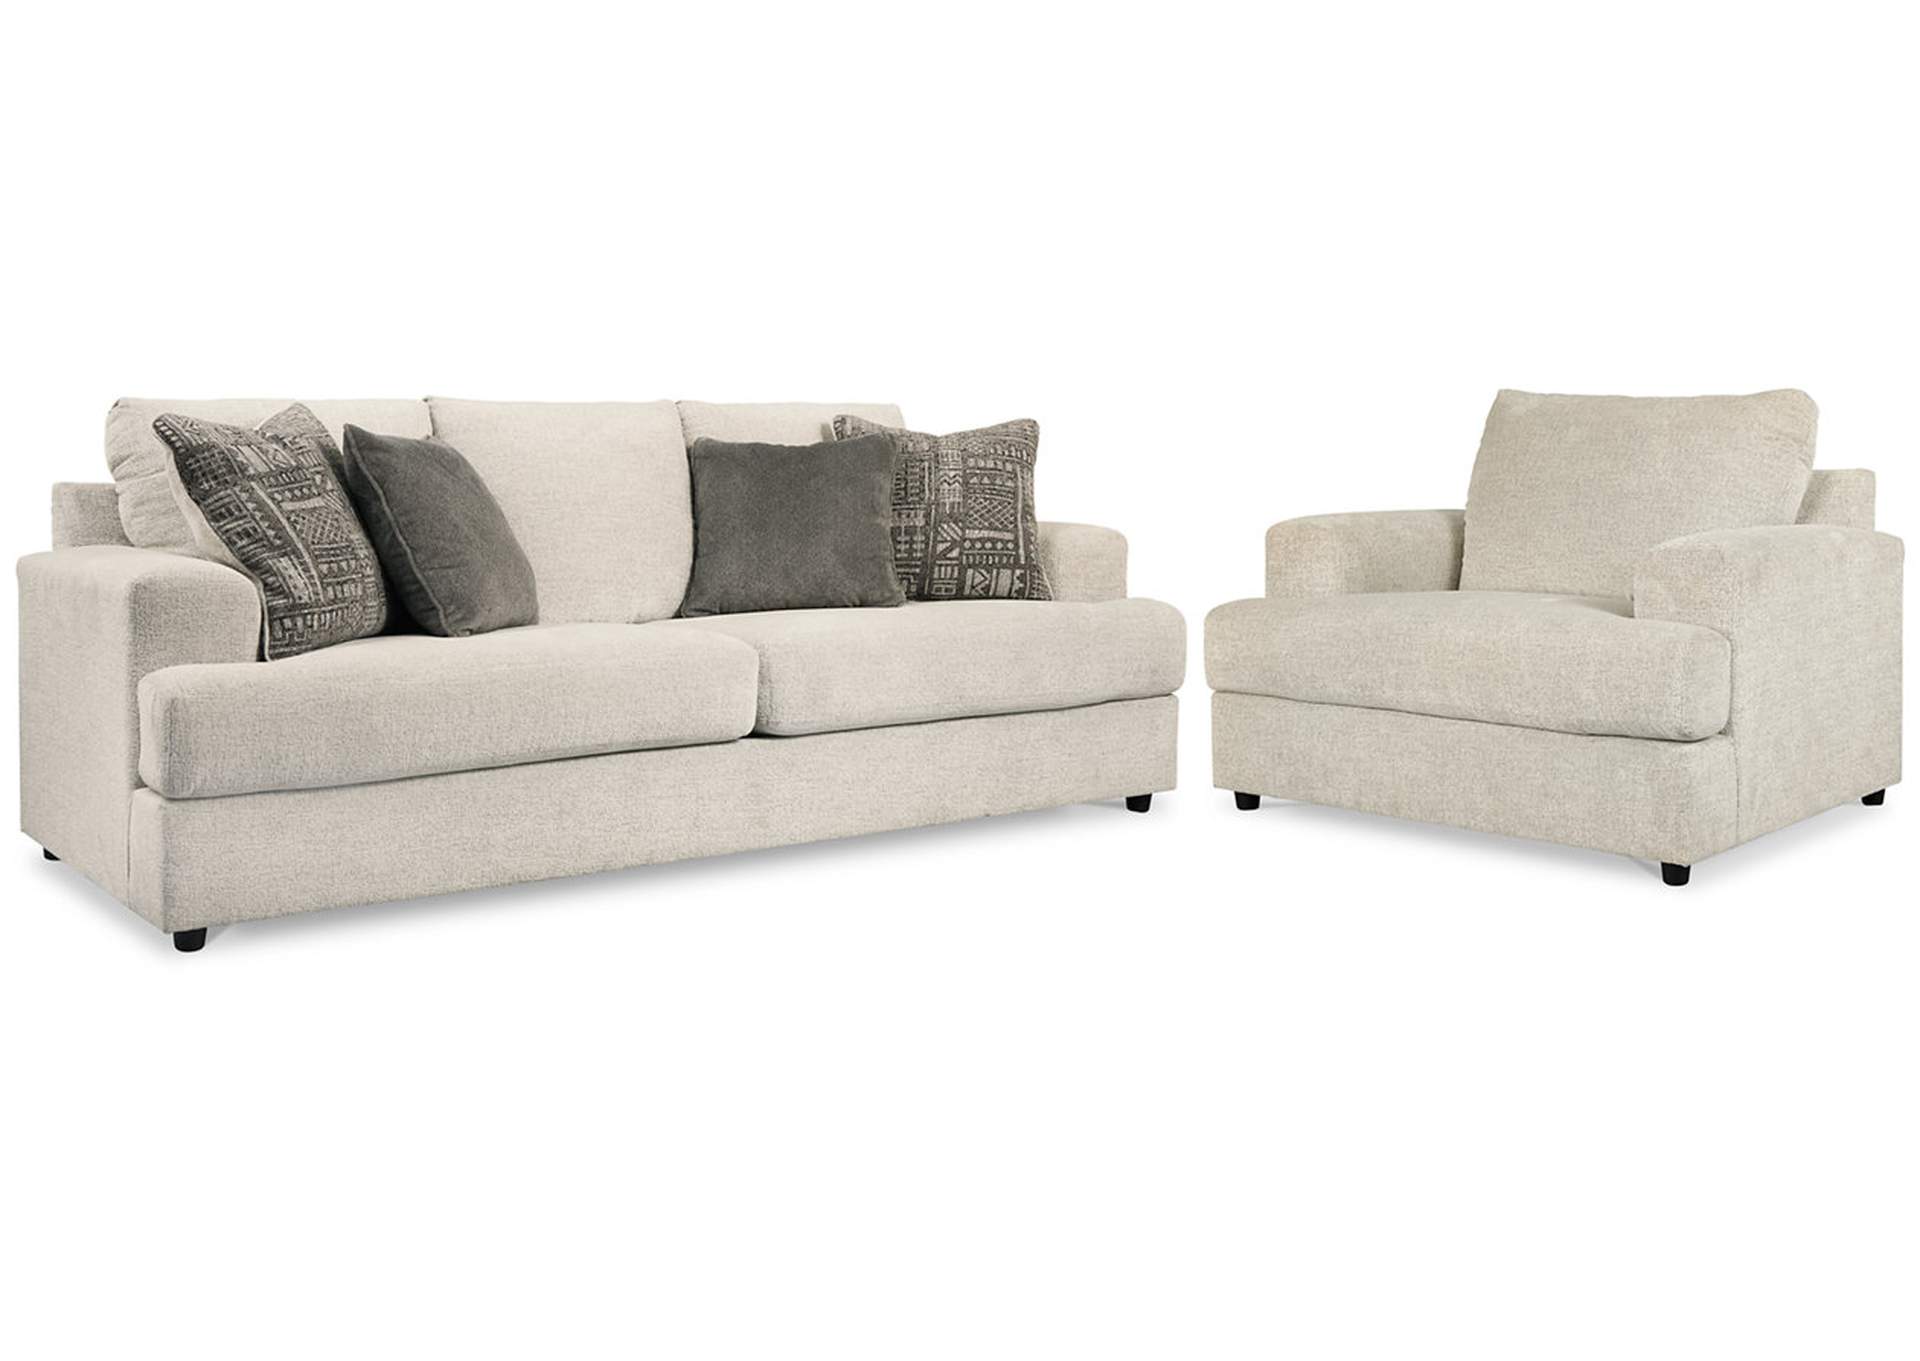 Soletren Sofa Sleeper and Oversized Chair,Signature Design By Ashley